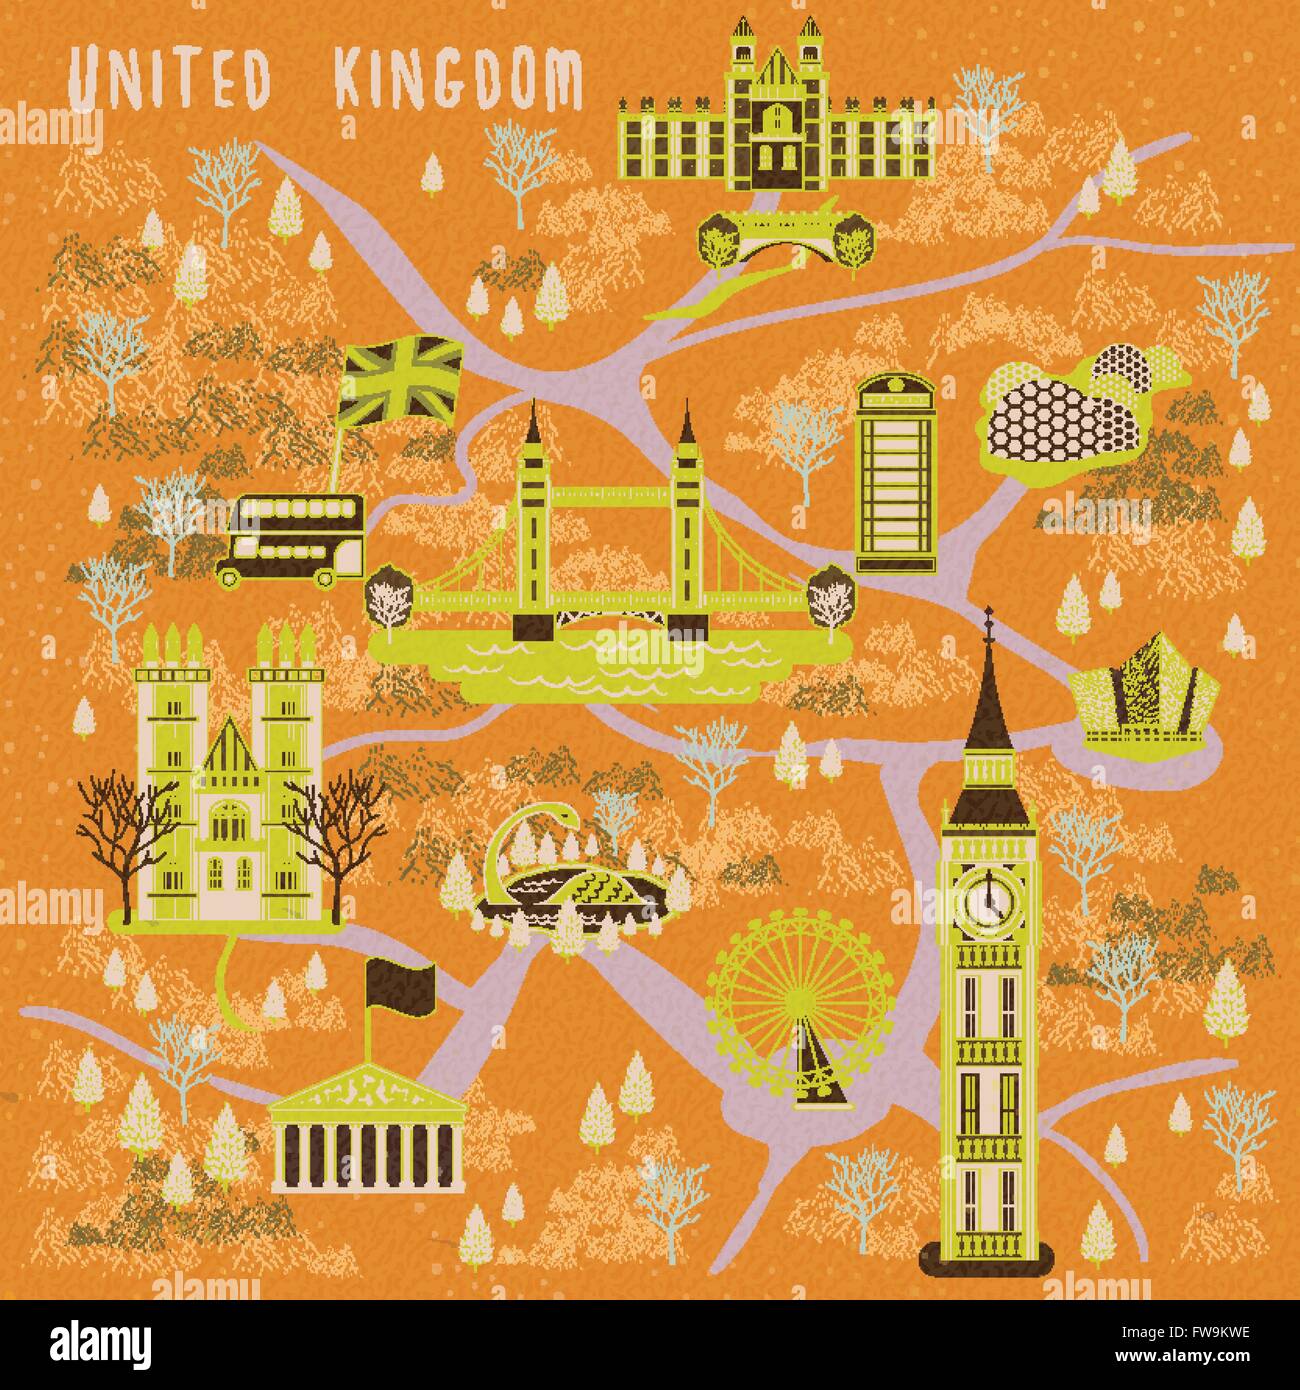 elegant United Kingdom travel poster design with attractions Stock Vector